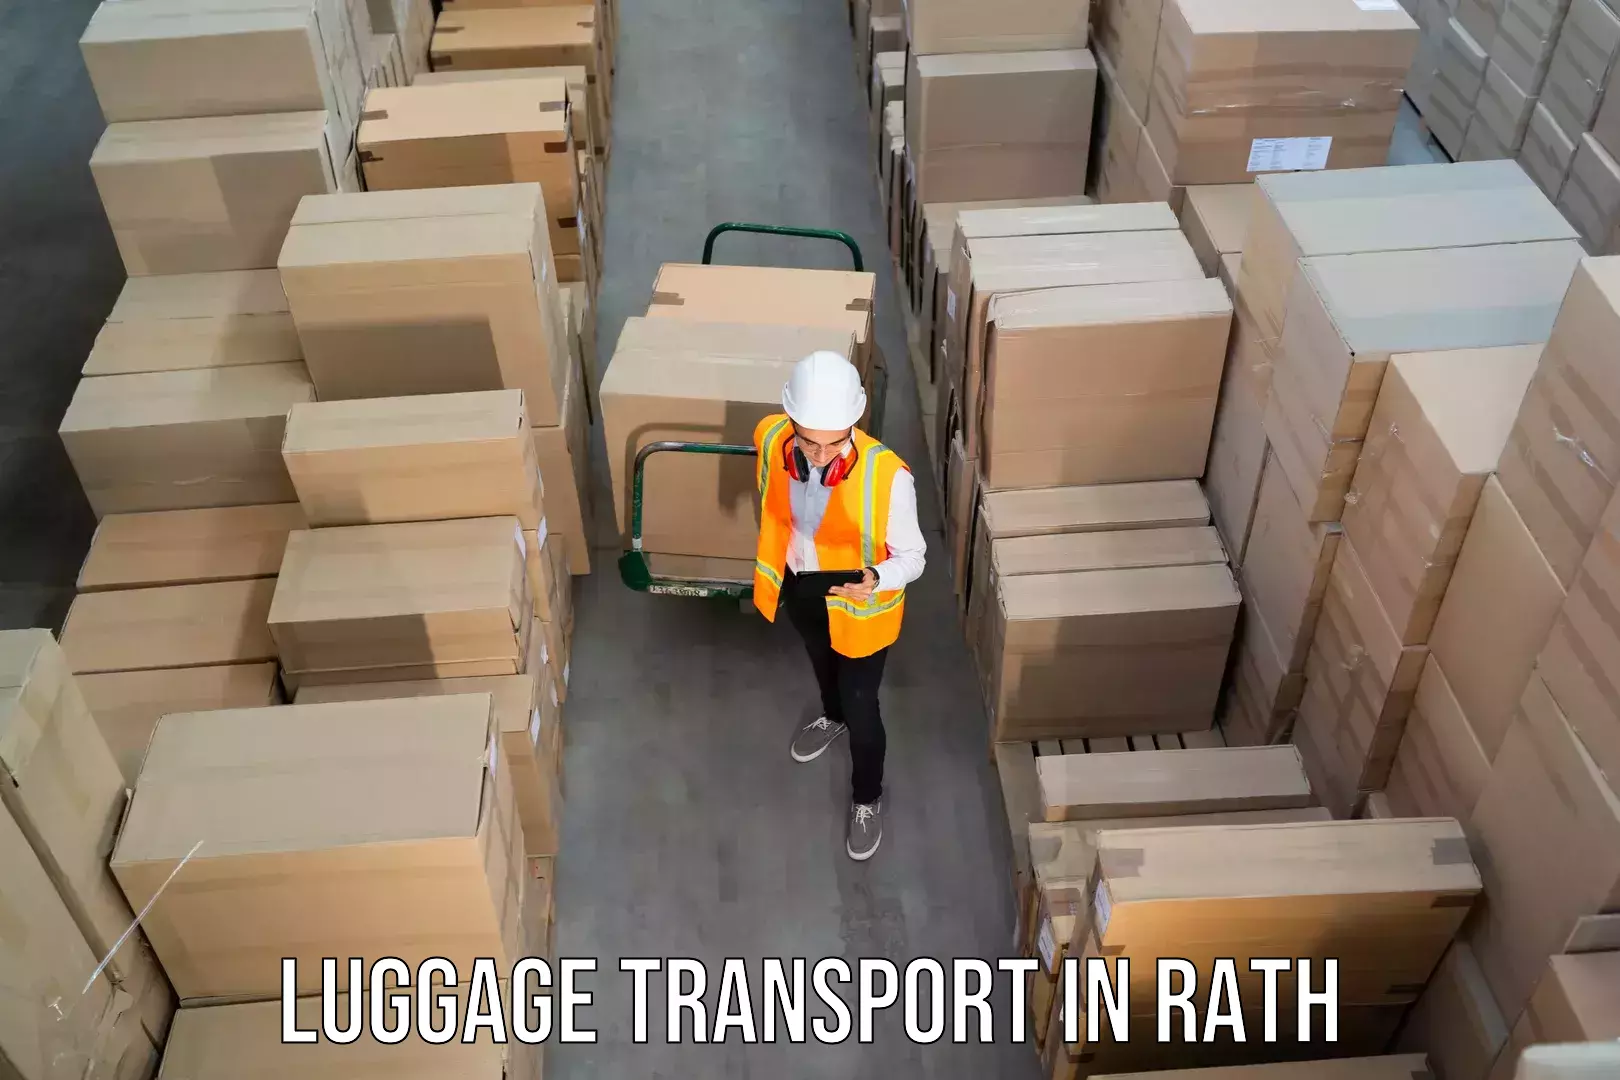 Luggage transport deals in Rath